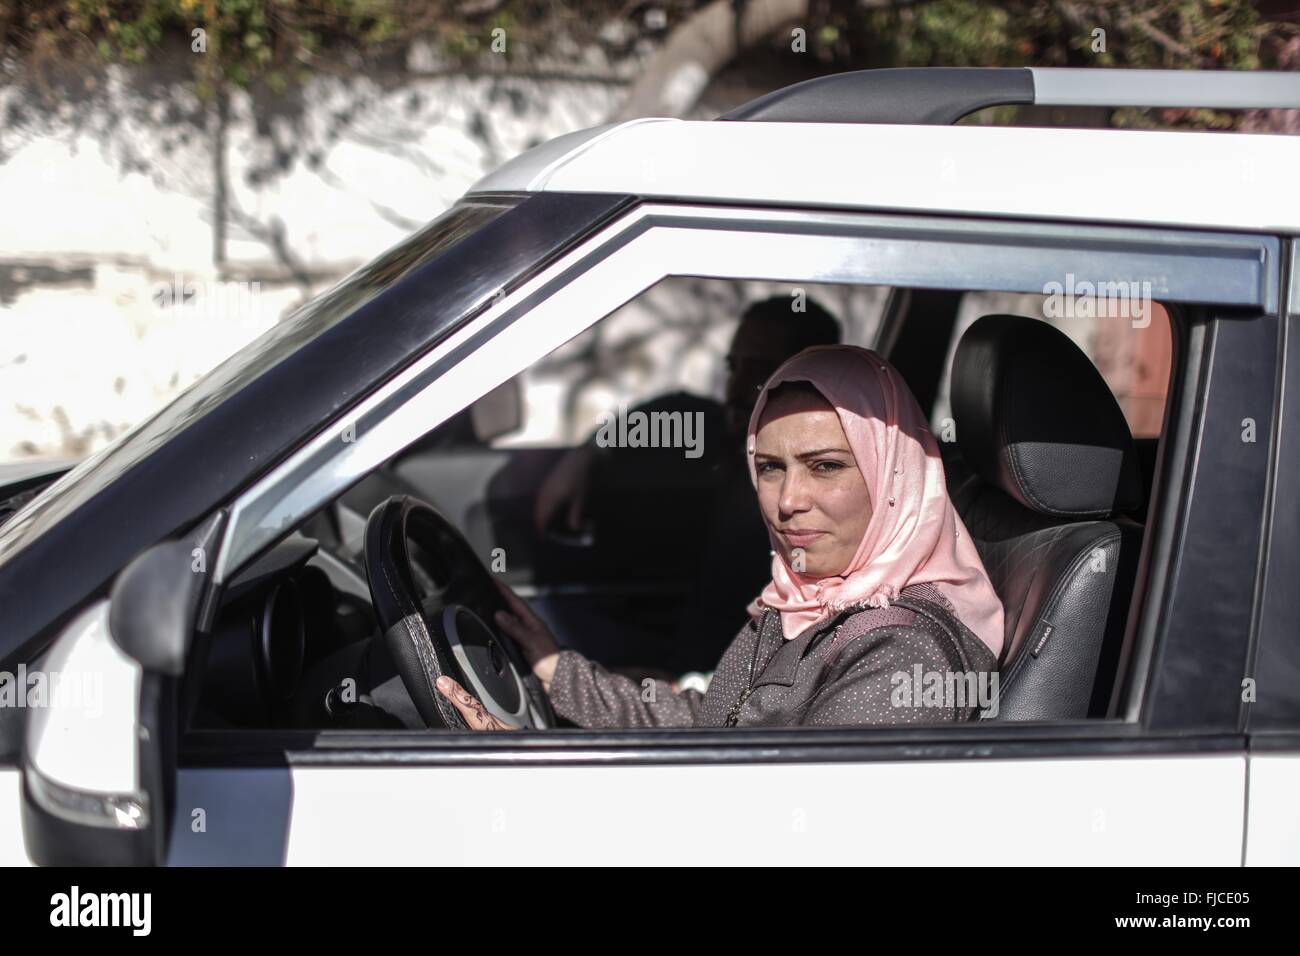 Gaza. 1st Mar, 2016. A Palestinian young woman drives a car belonging to a driving school during her lesson in Gaza City, March 1, 2016. A new regulation in Gaza for women to be accompanied by chaperones for driving lessons with male instructors has stirred a debate. © Wissam Nassar/Xinhua/Alamy Live News Stock Photo